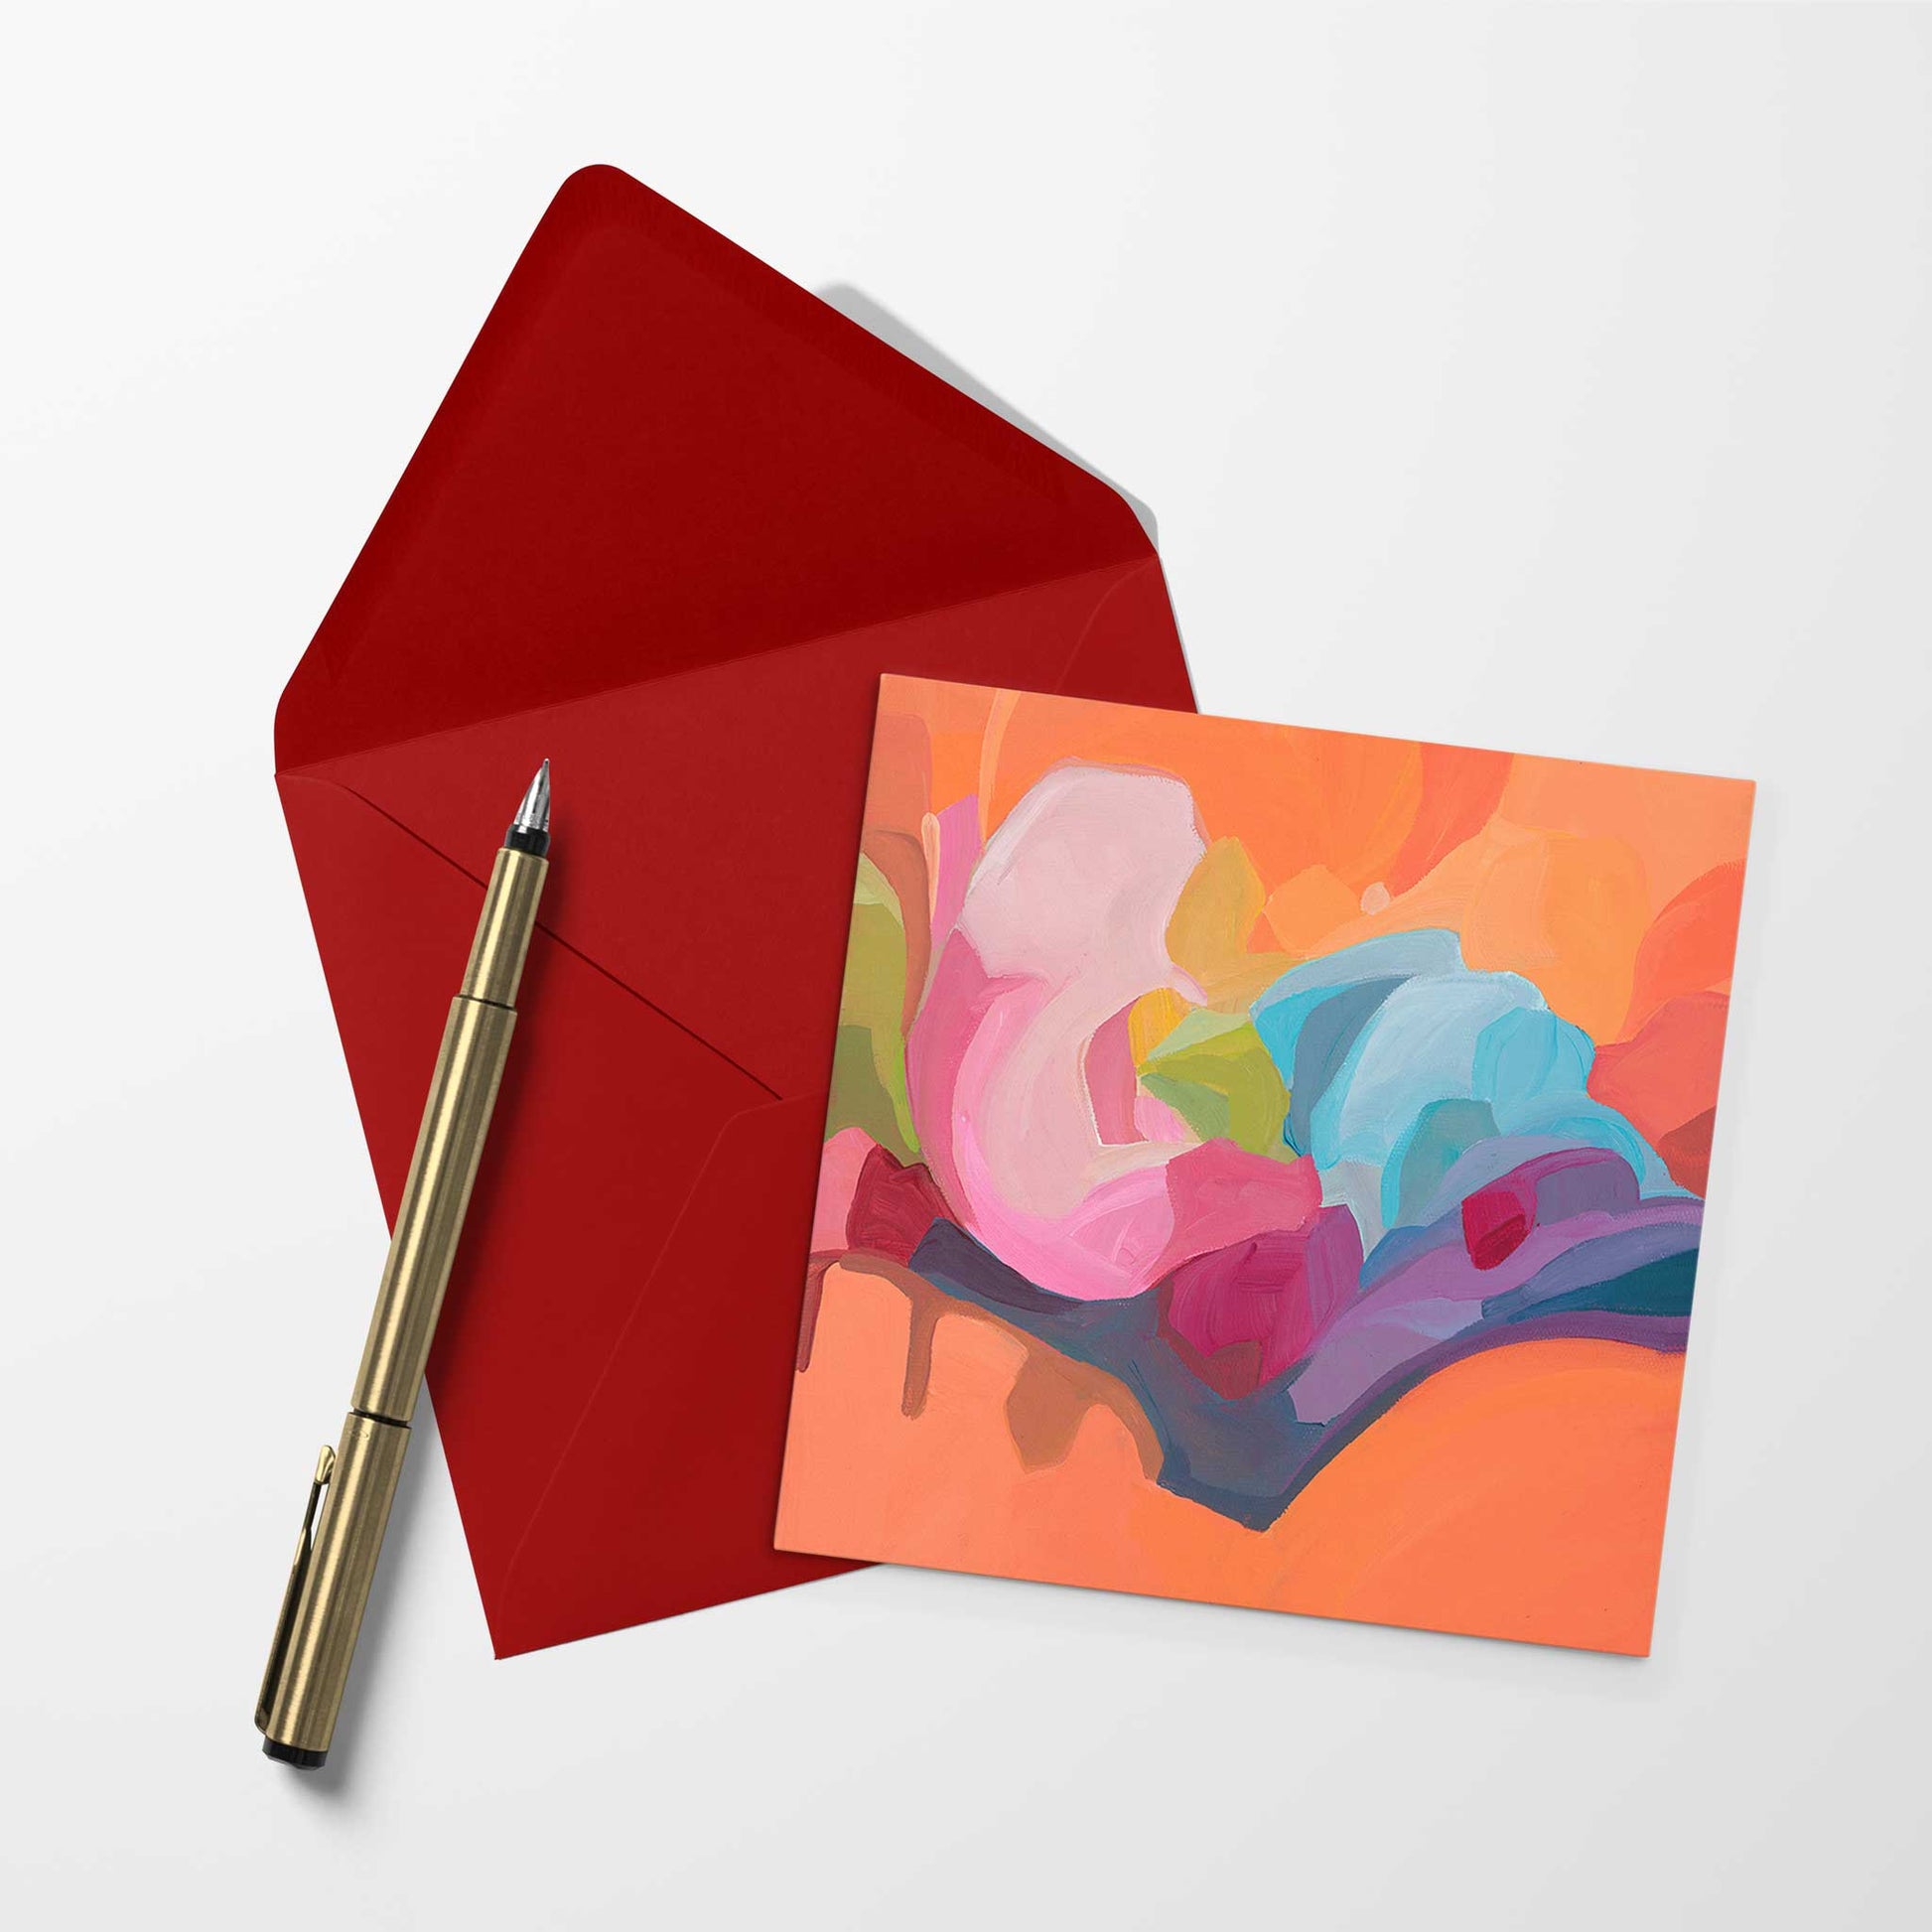 blank art card with orange abstract artwork and red envelope